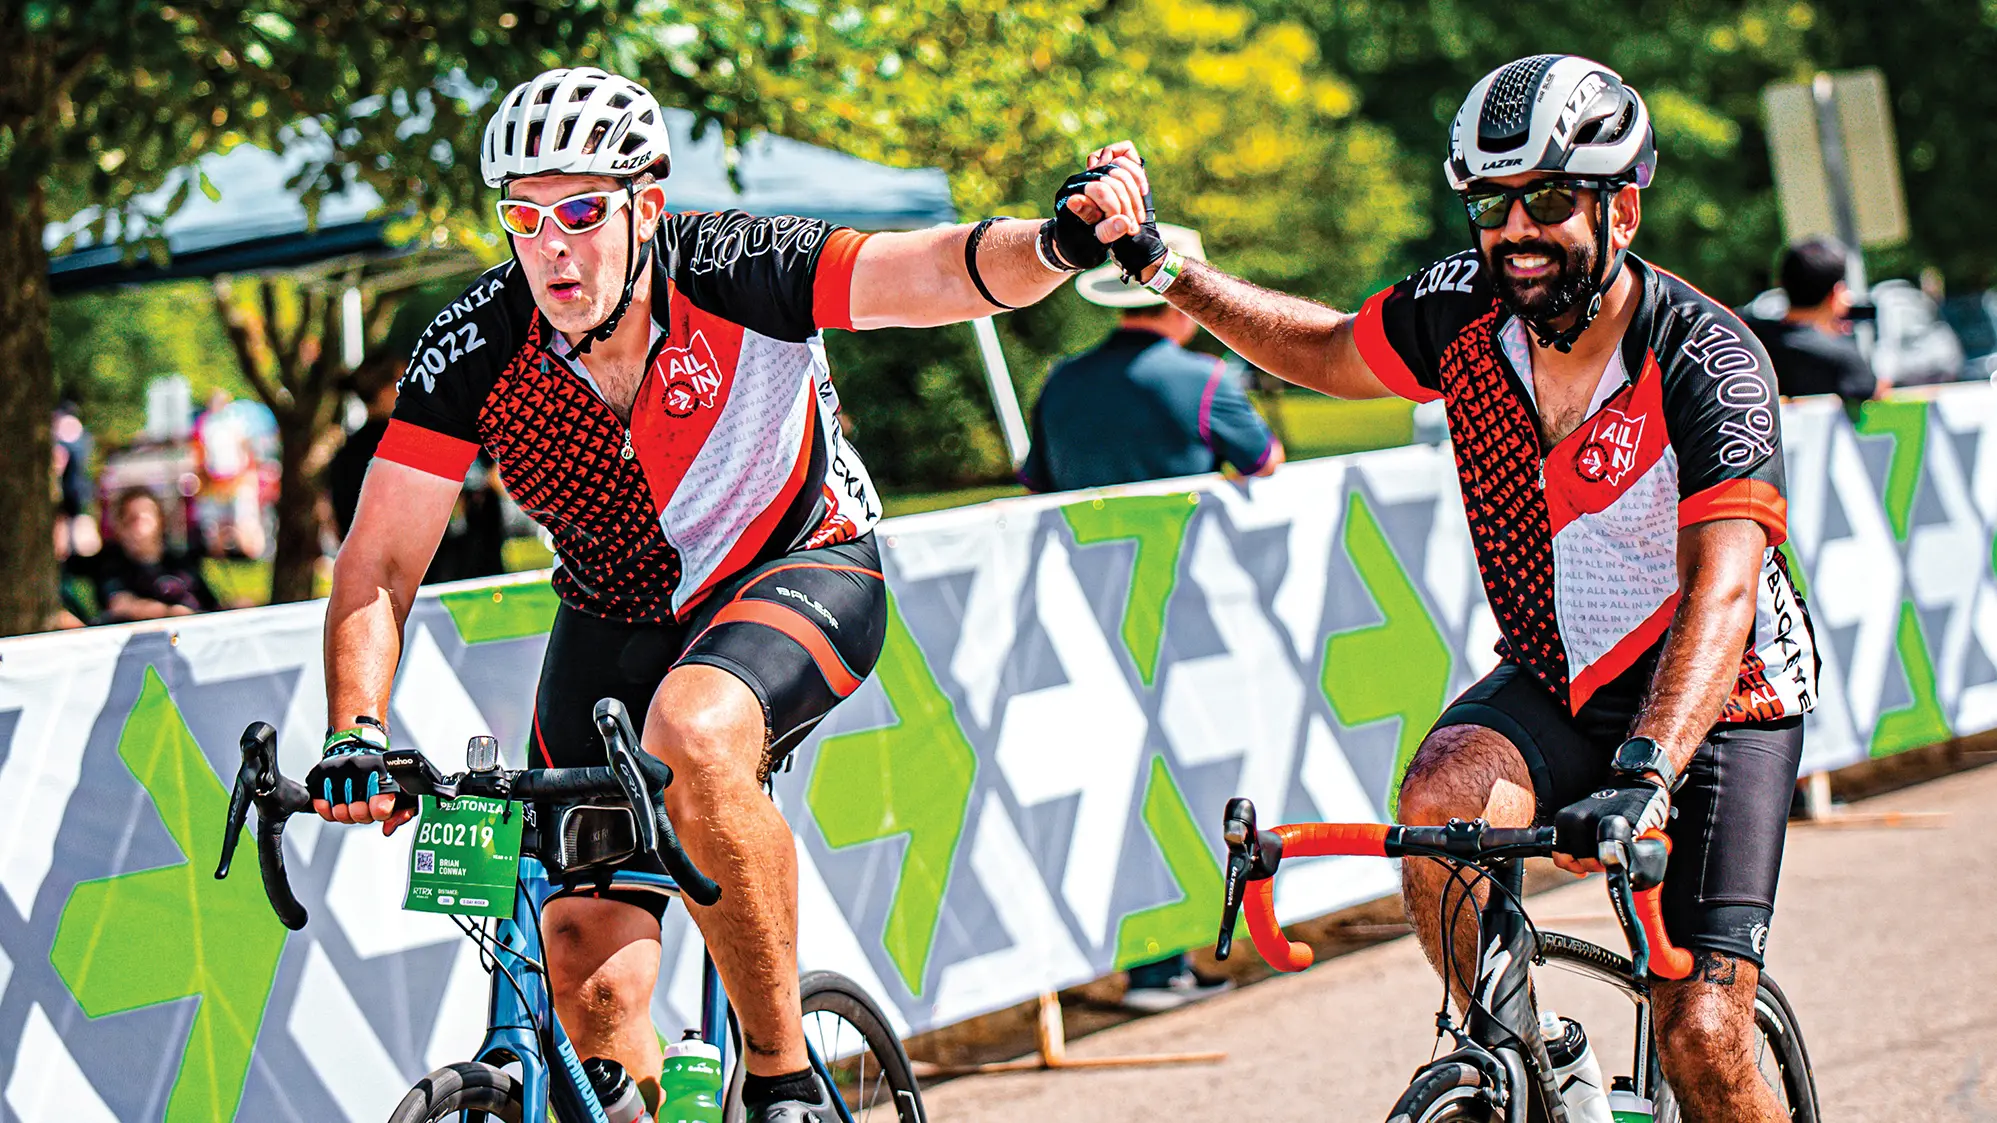 As they ride along a makeshift wall covered in Pelotonia arrow logos, two men on bikes high five. They’re likely near the finish line, and they both wear helmets, sunglasses and bicycle gloves. The man on the left is white and has an expression that says he is concentrating. The bearded man on the right looks to be of Indian descent and is smiling.